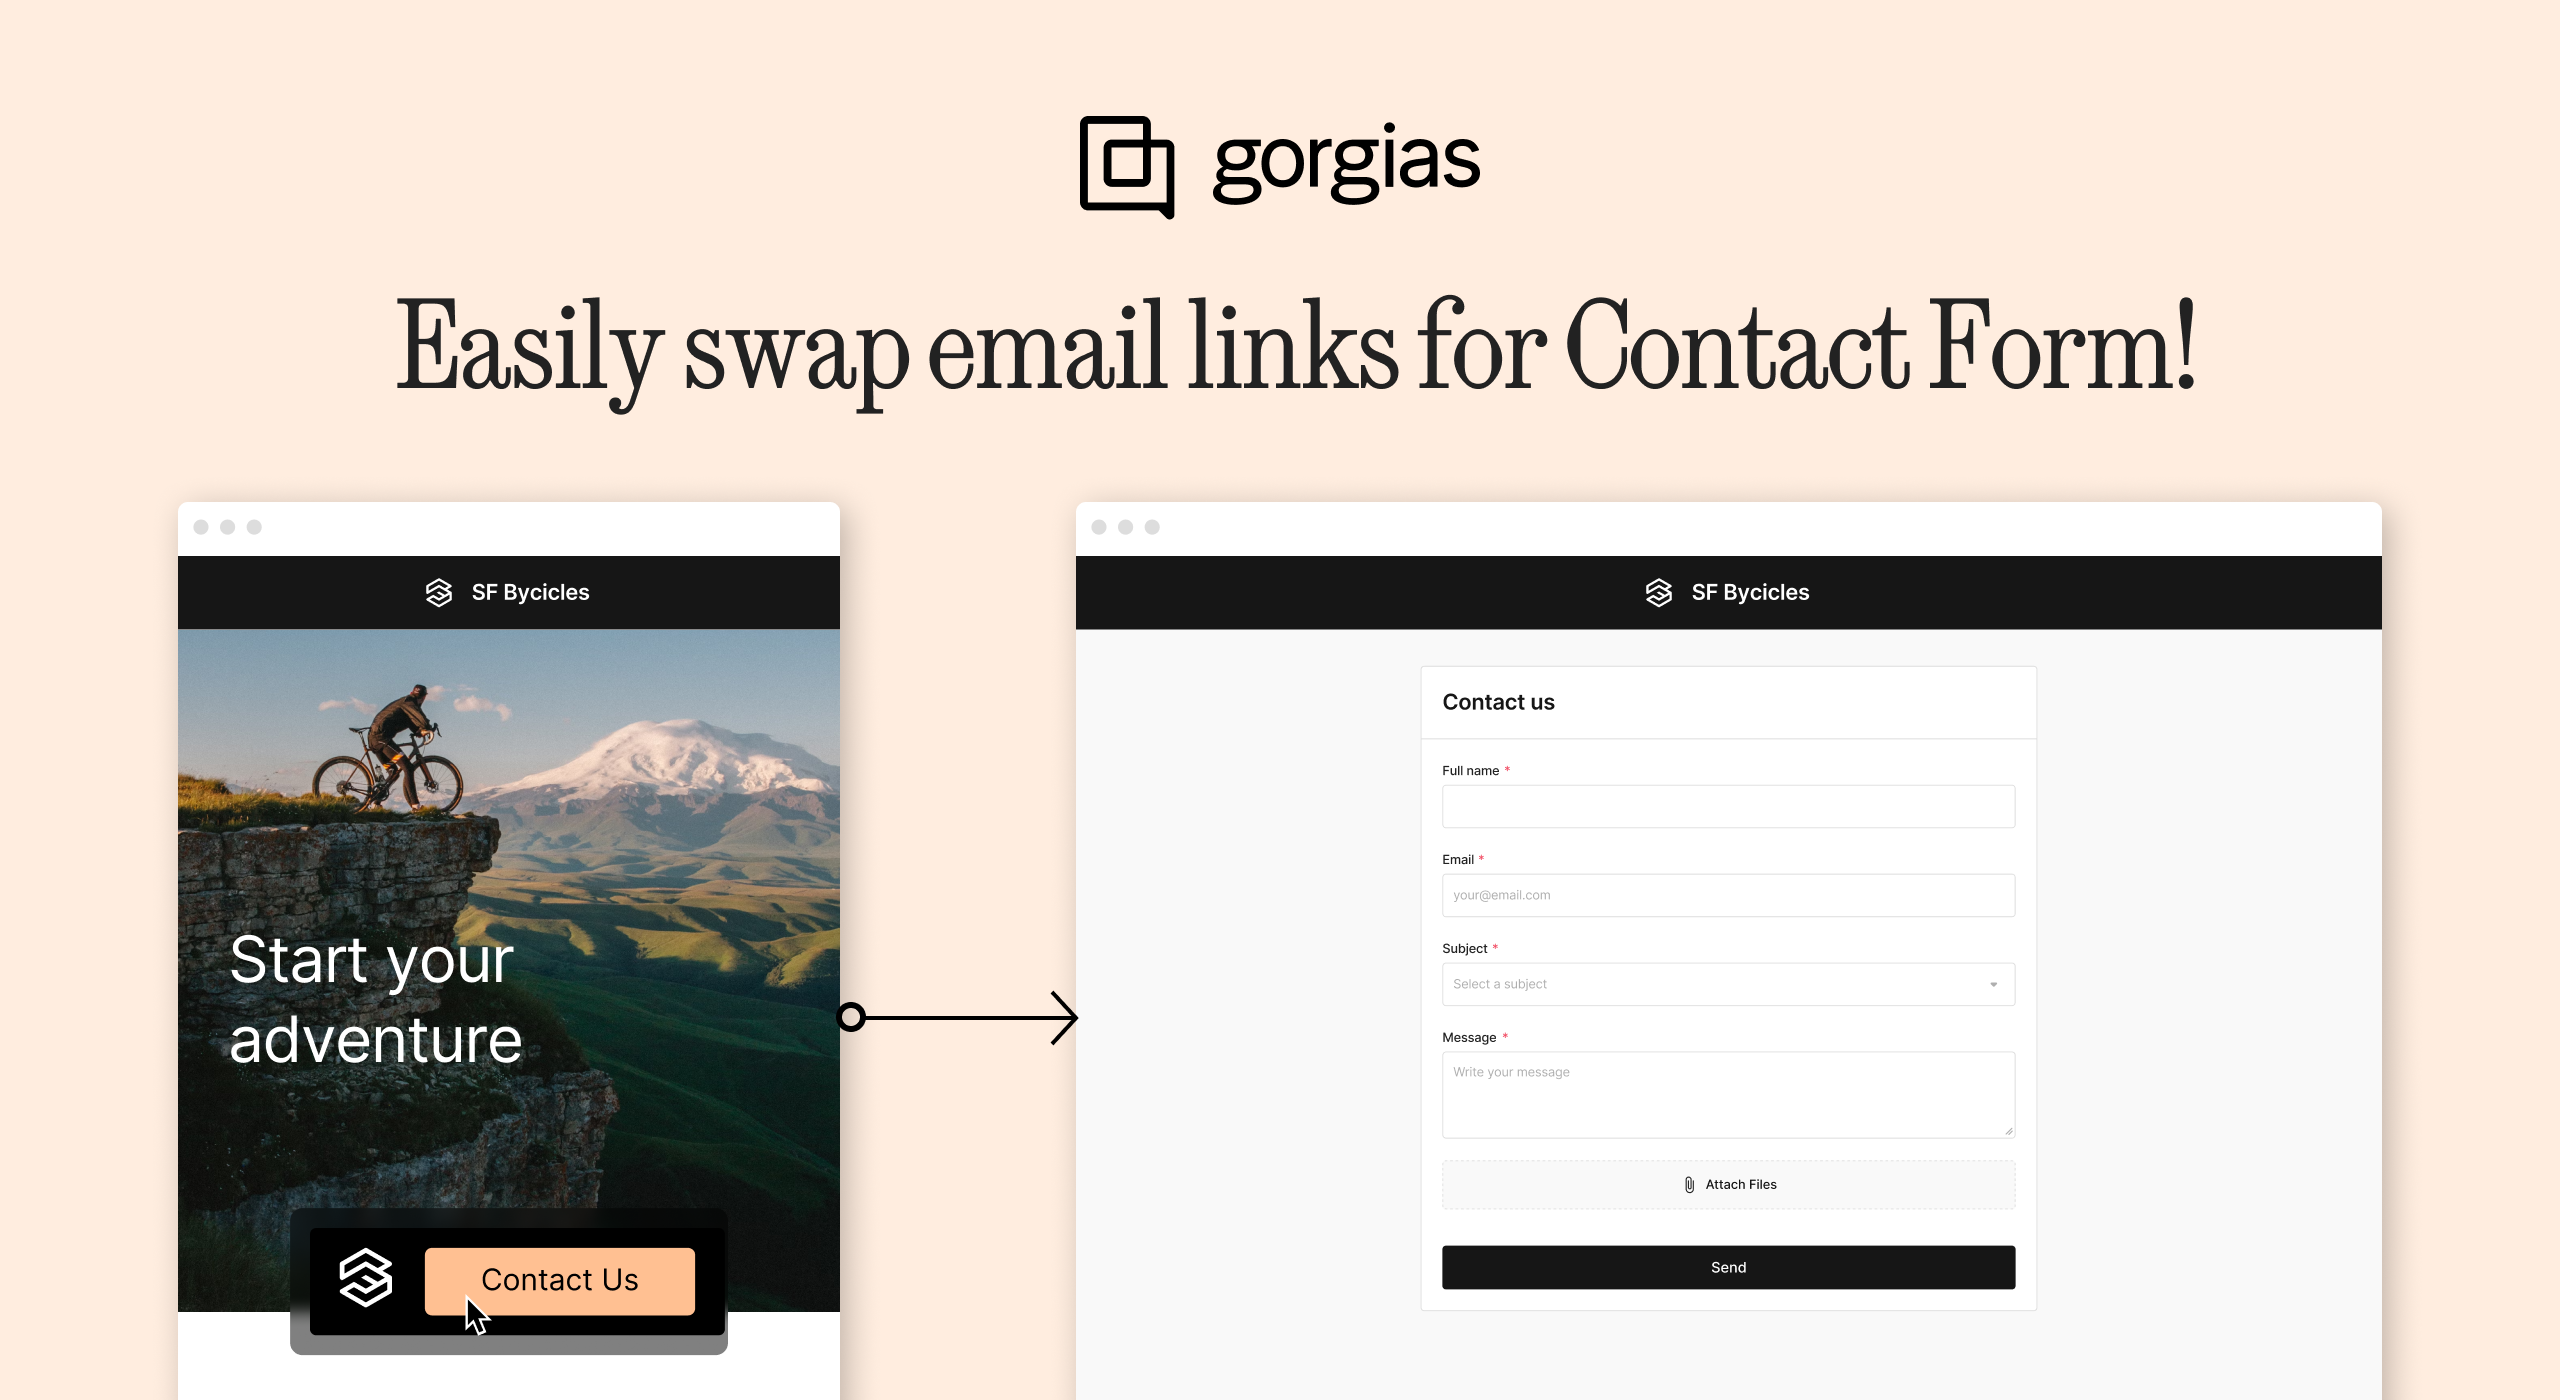 Send customers to Contact Form instead of email to reduce spam and increase automation!